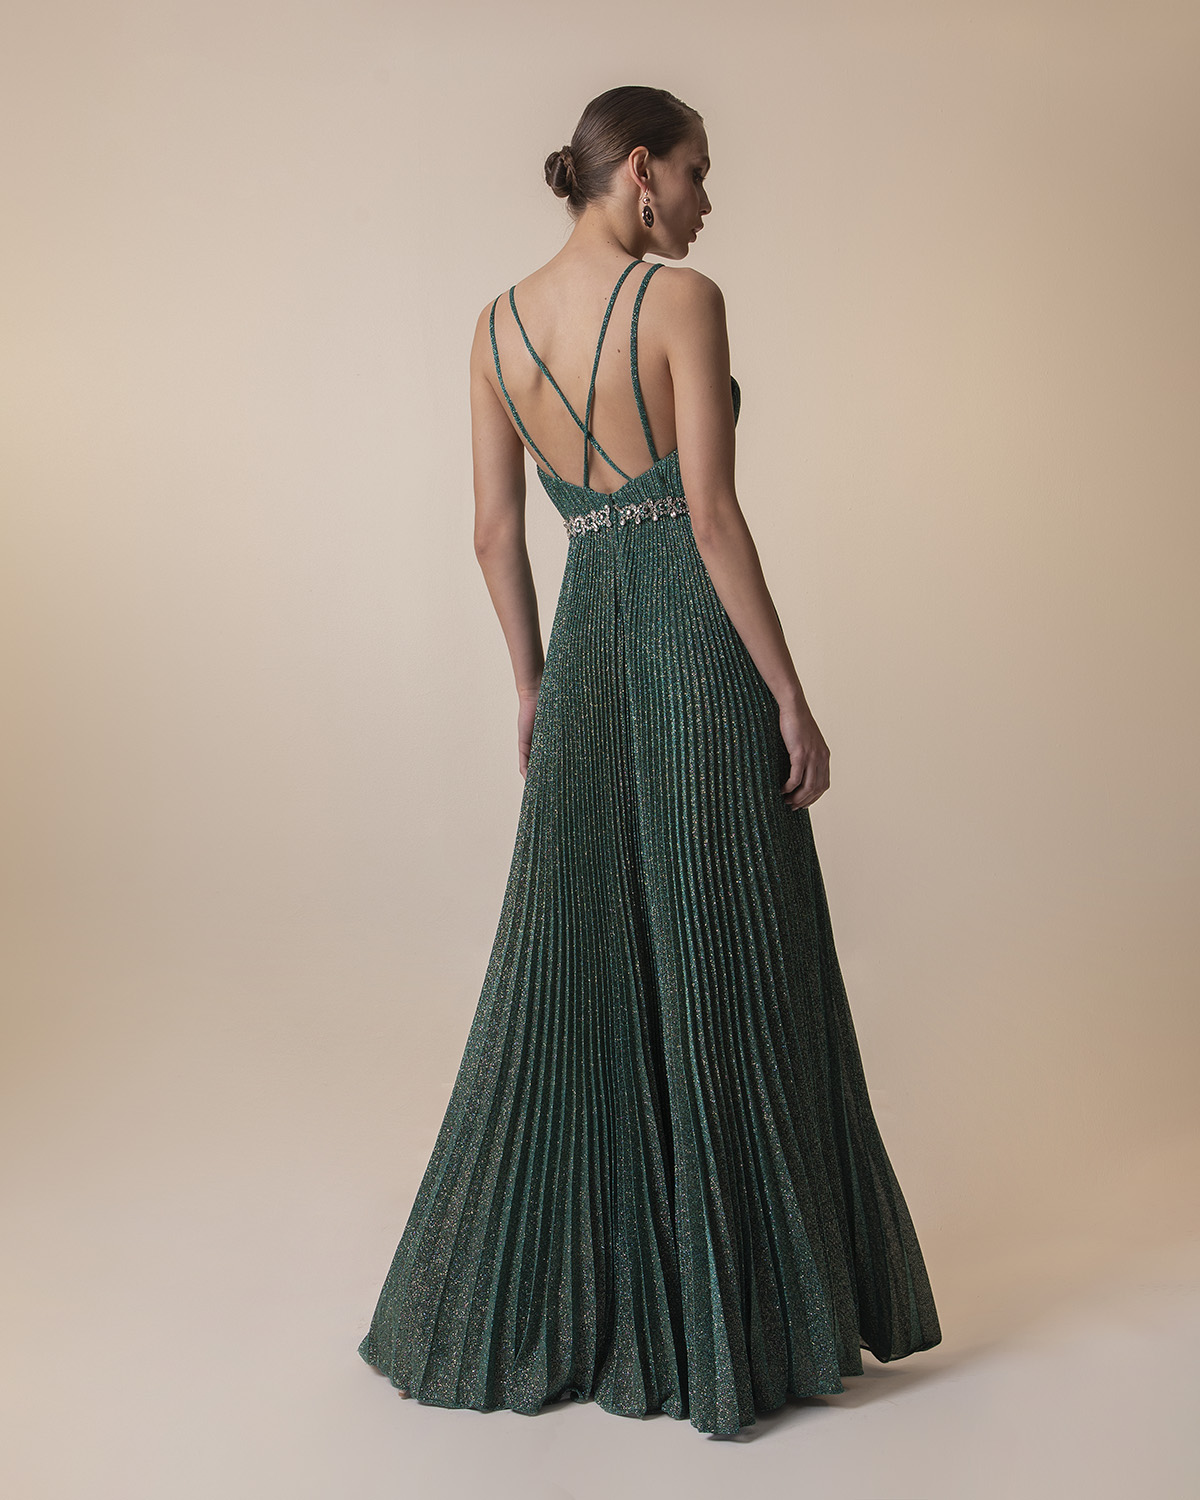 Evening Dresses / Long pleated evening dress with shining fabric and beading around the waist